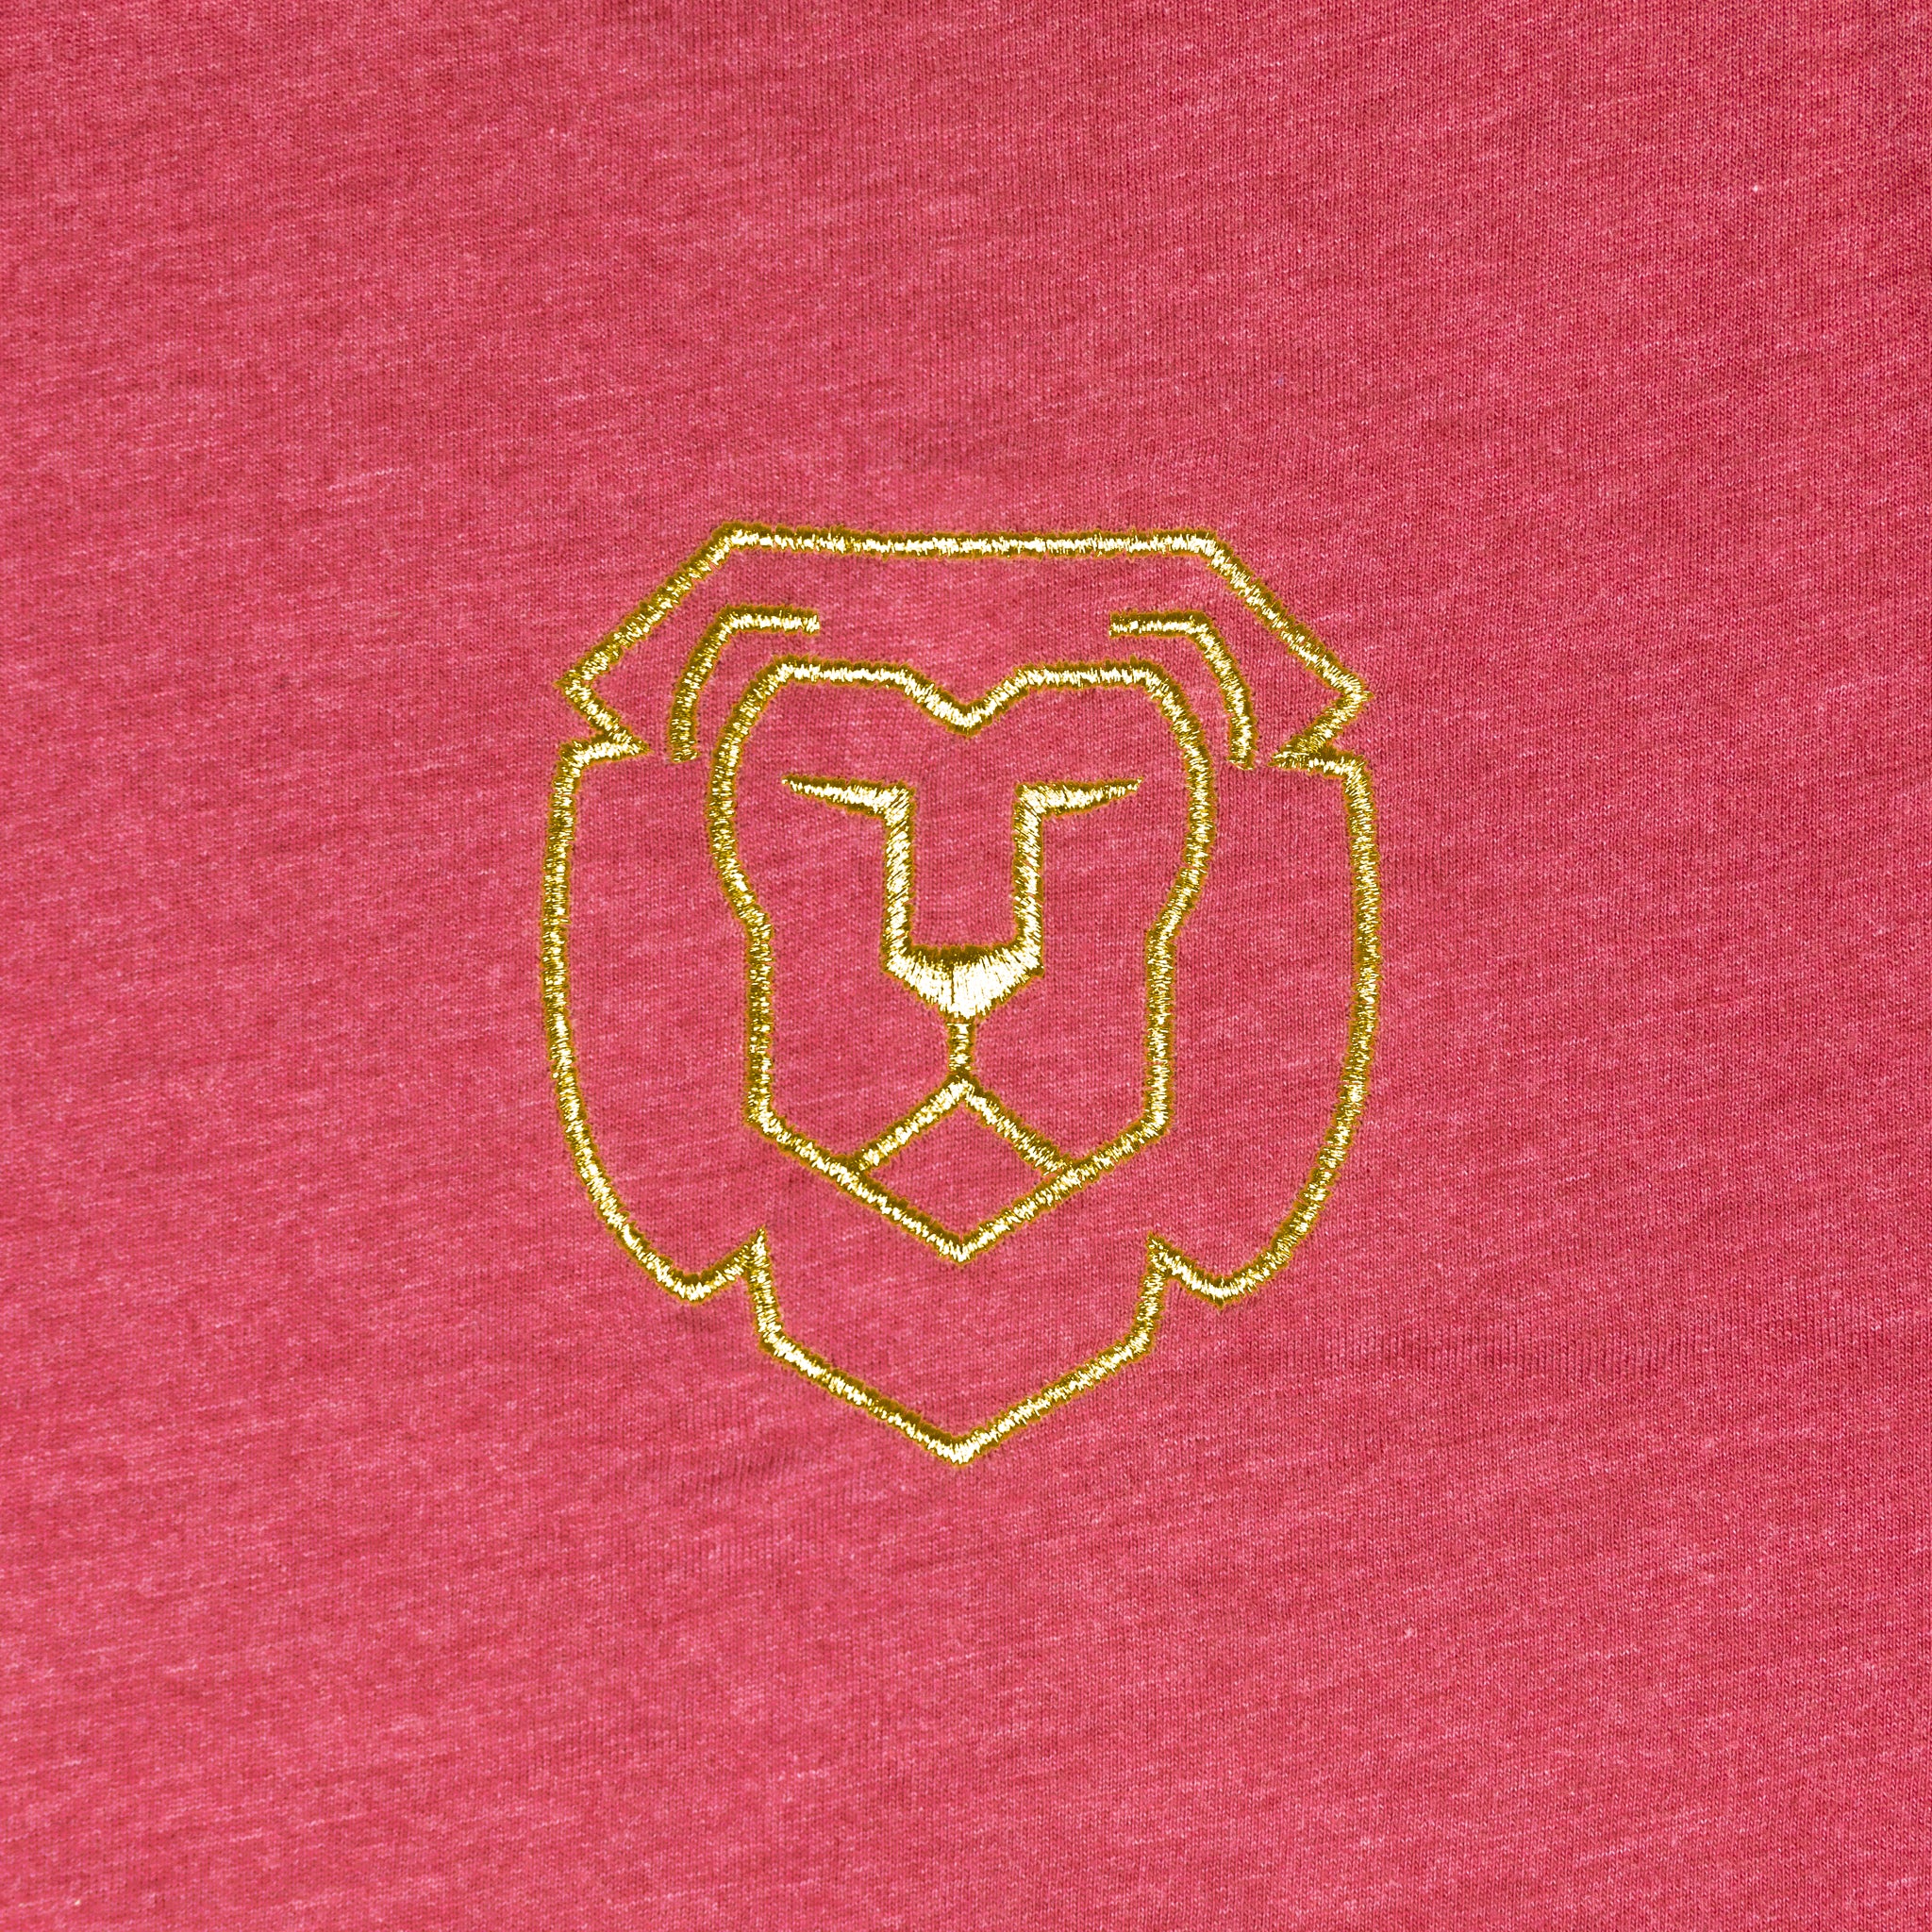 Super Carlin Brothers Red Embroidered Lion Shirt Close Up